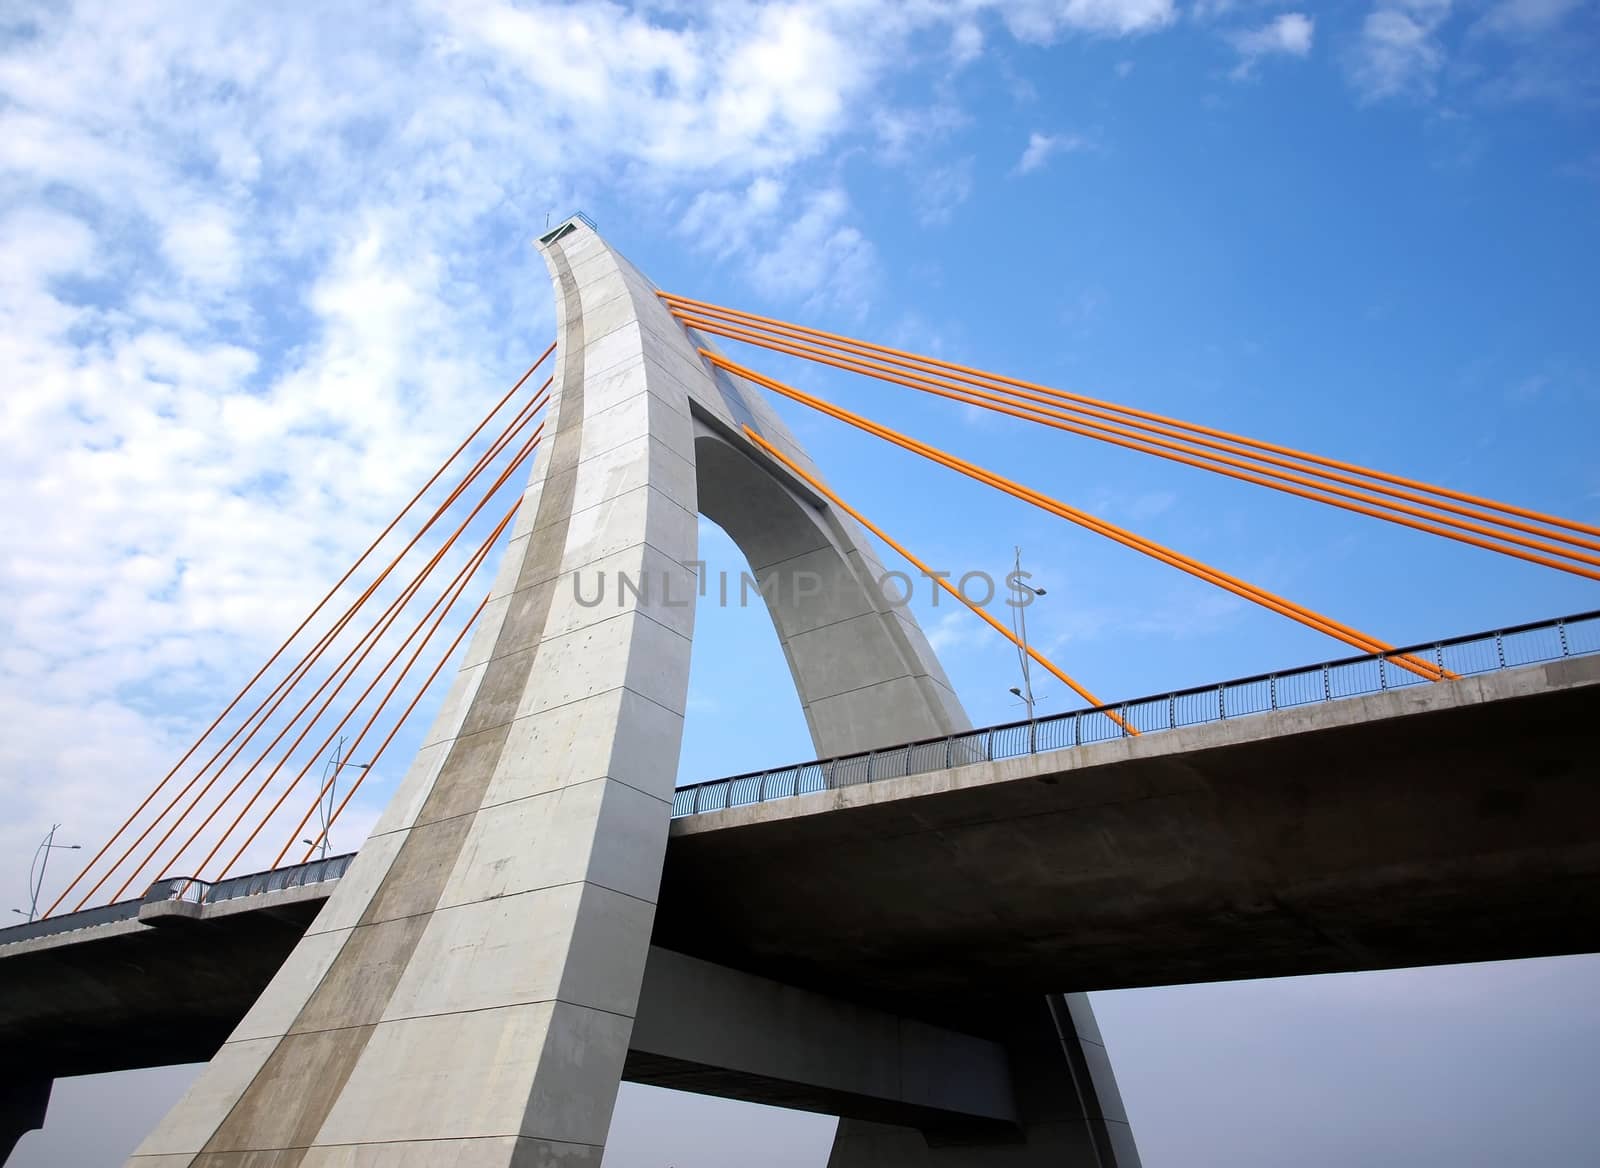 Recently Completed Cable-Stayed Bridge by shiyali